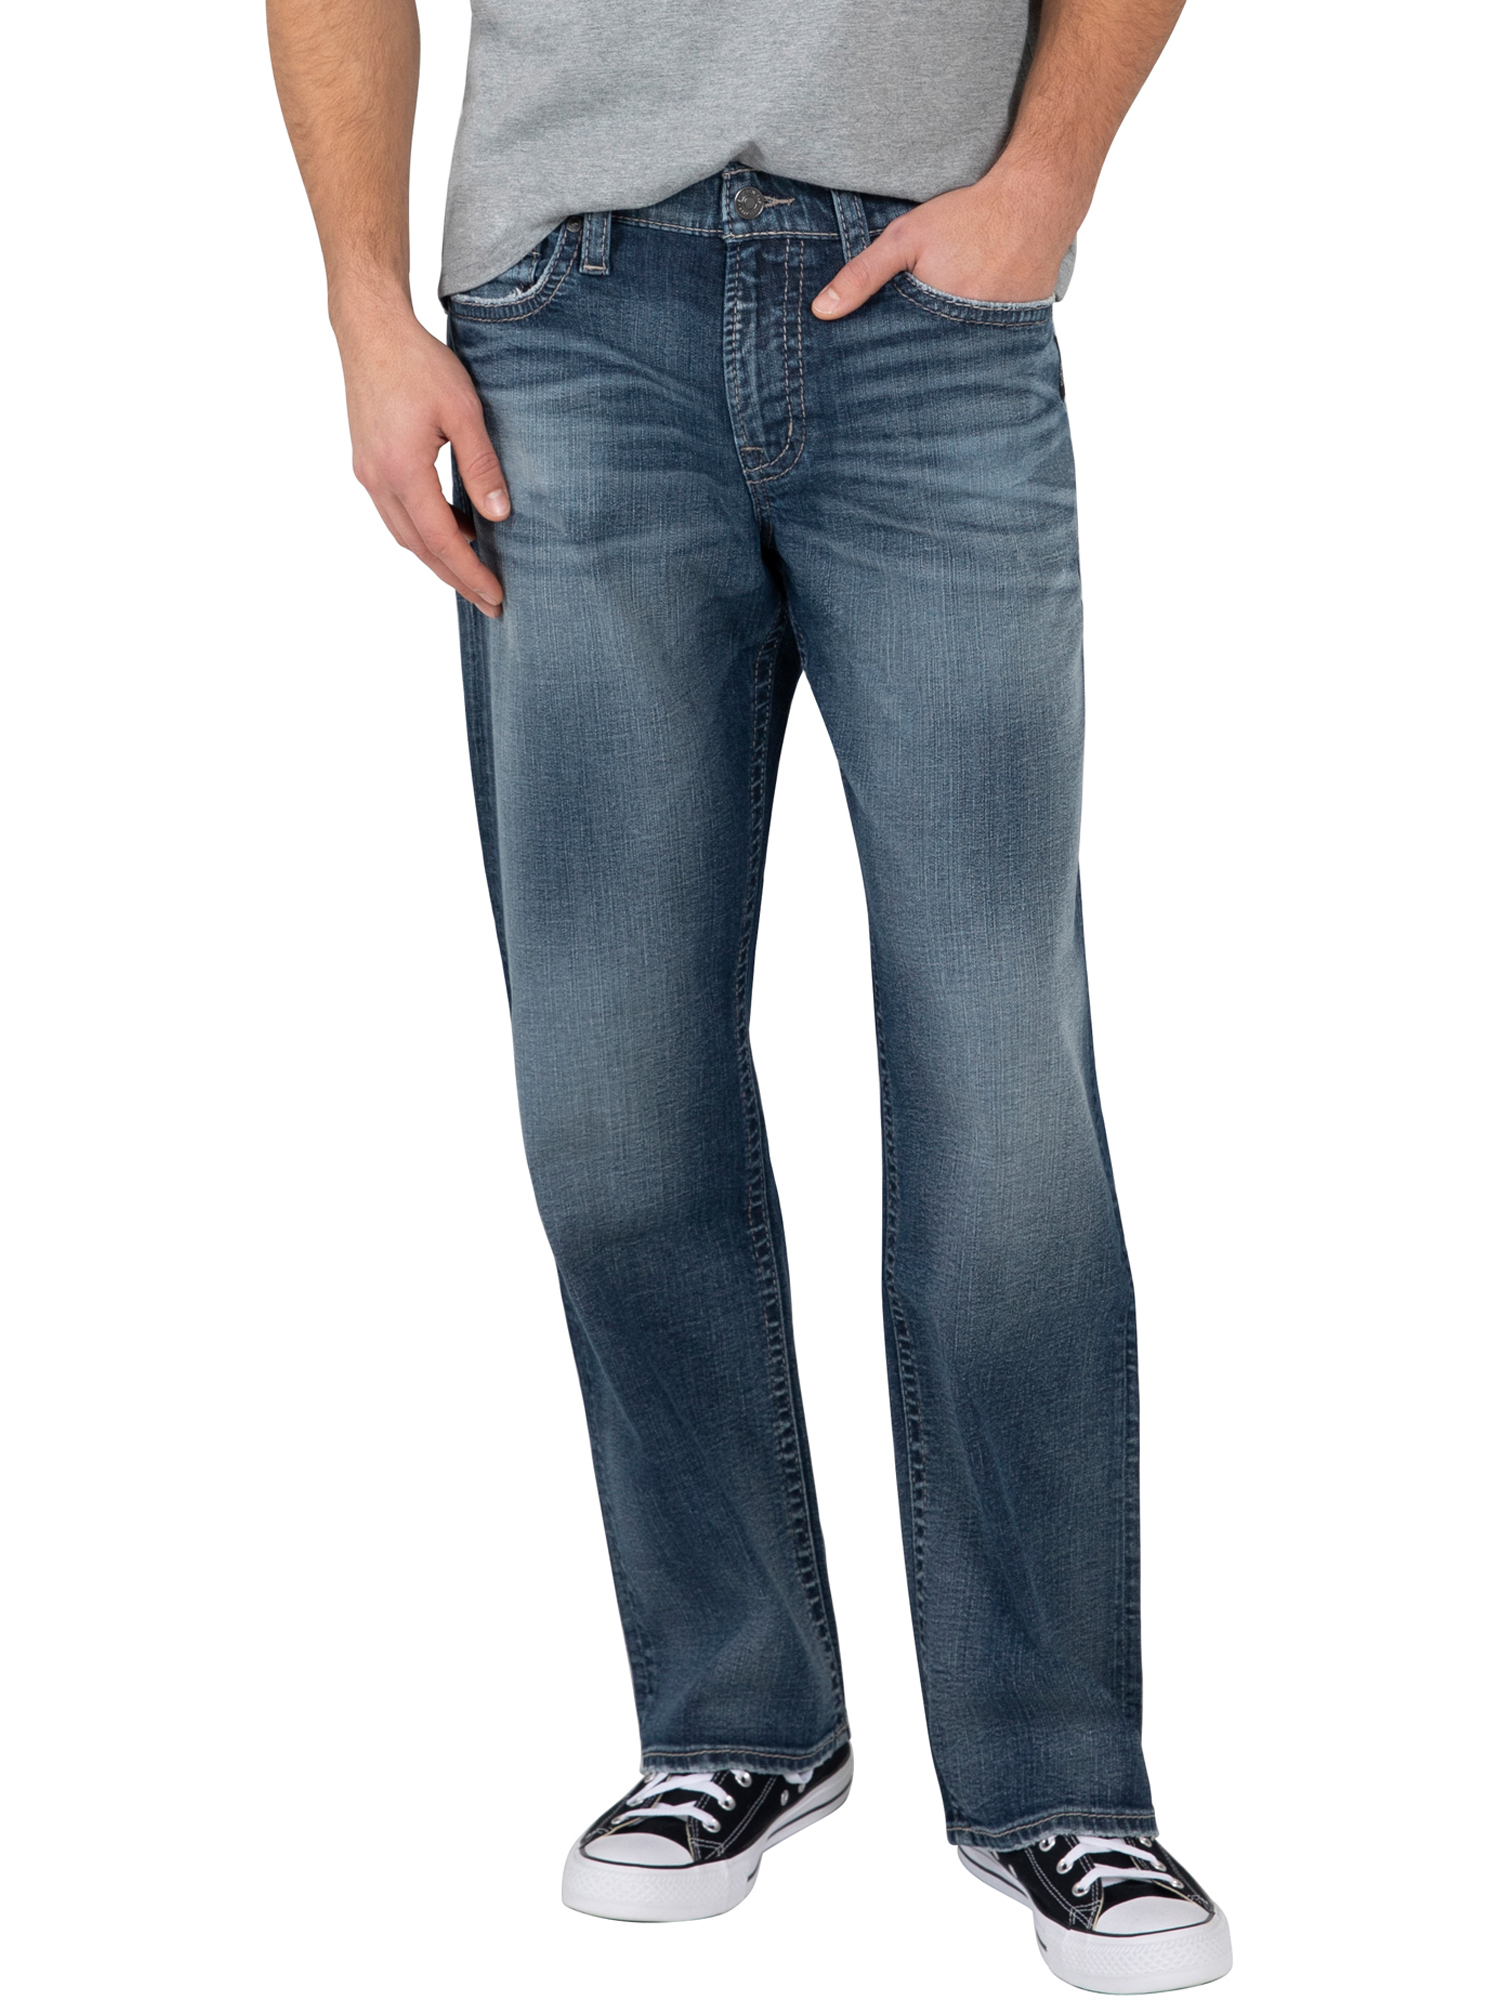 Silver Jeans Co. Men's Gordie Loose Fit Straight Leg Jeans, Waist Sizes 28-44 - image 1 of 3